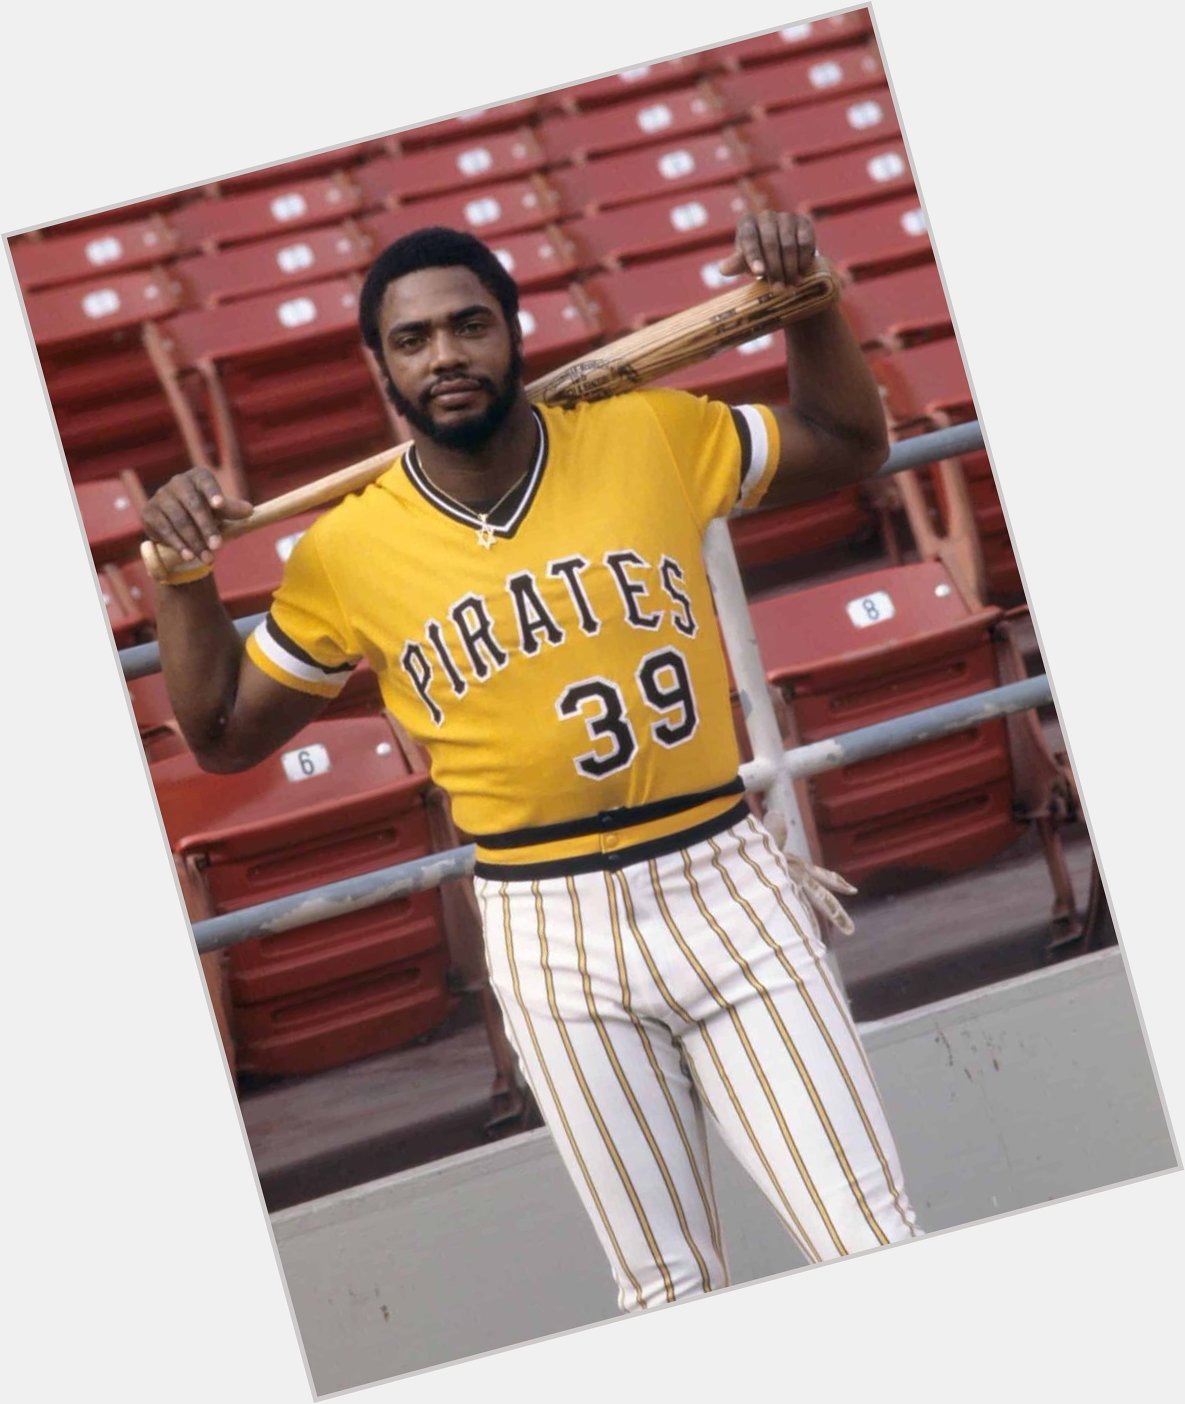 Happy birthday to The Cobra Dave Parker who turns 69 today 6/9/2020. 